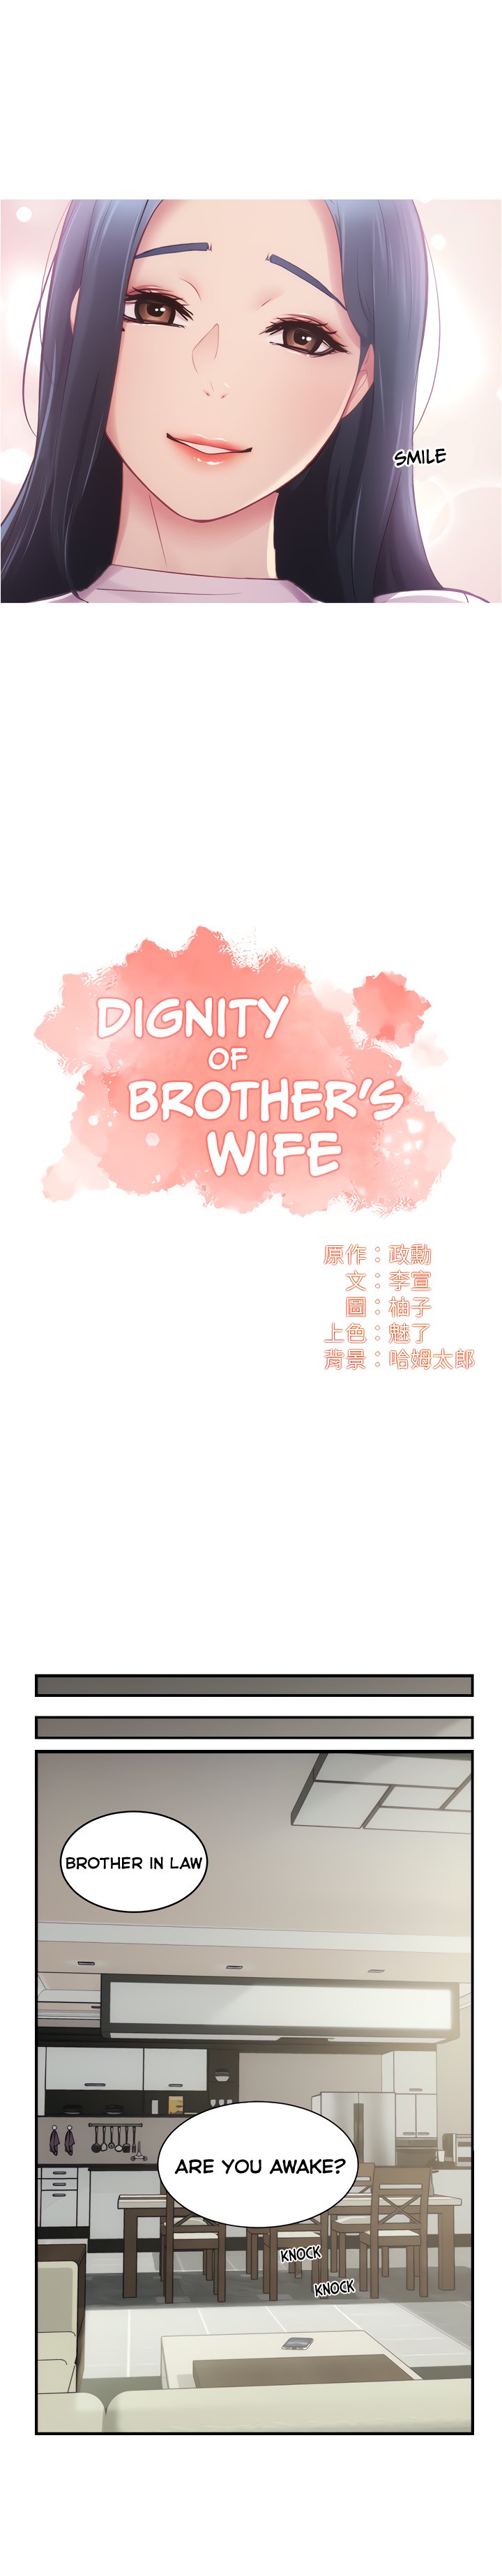 Brother’s Wife Dignity - Chapter 12 Page 3